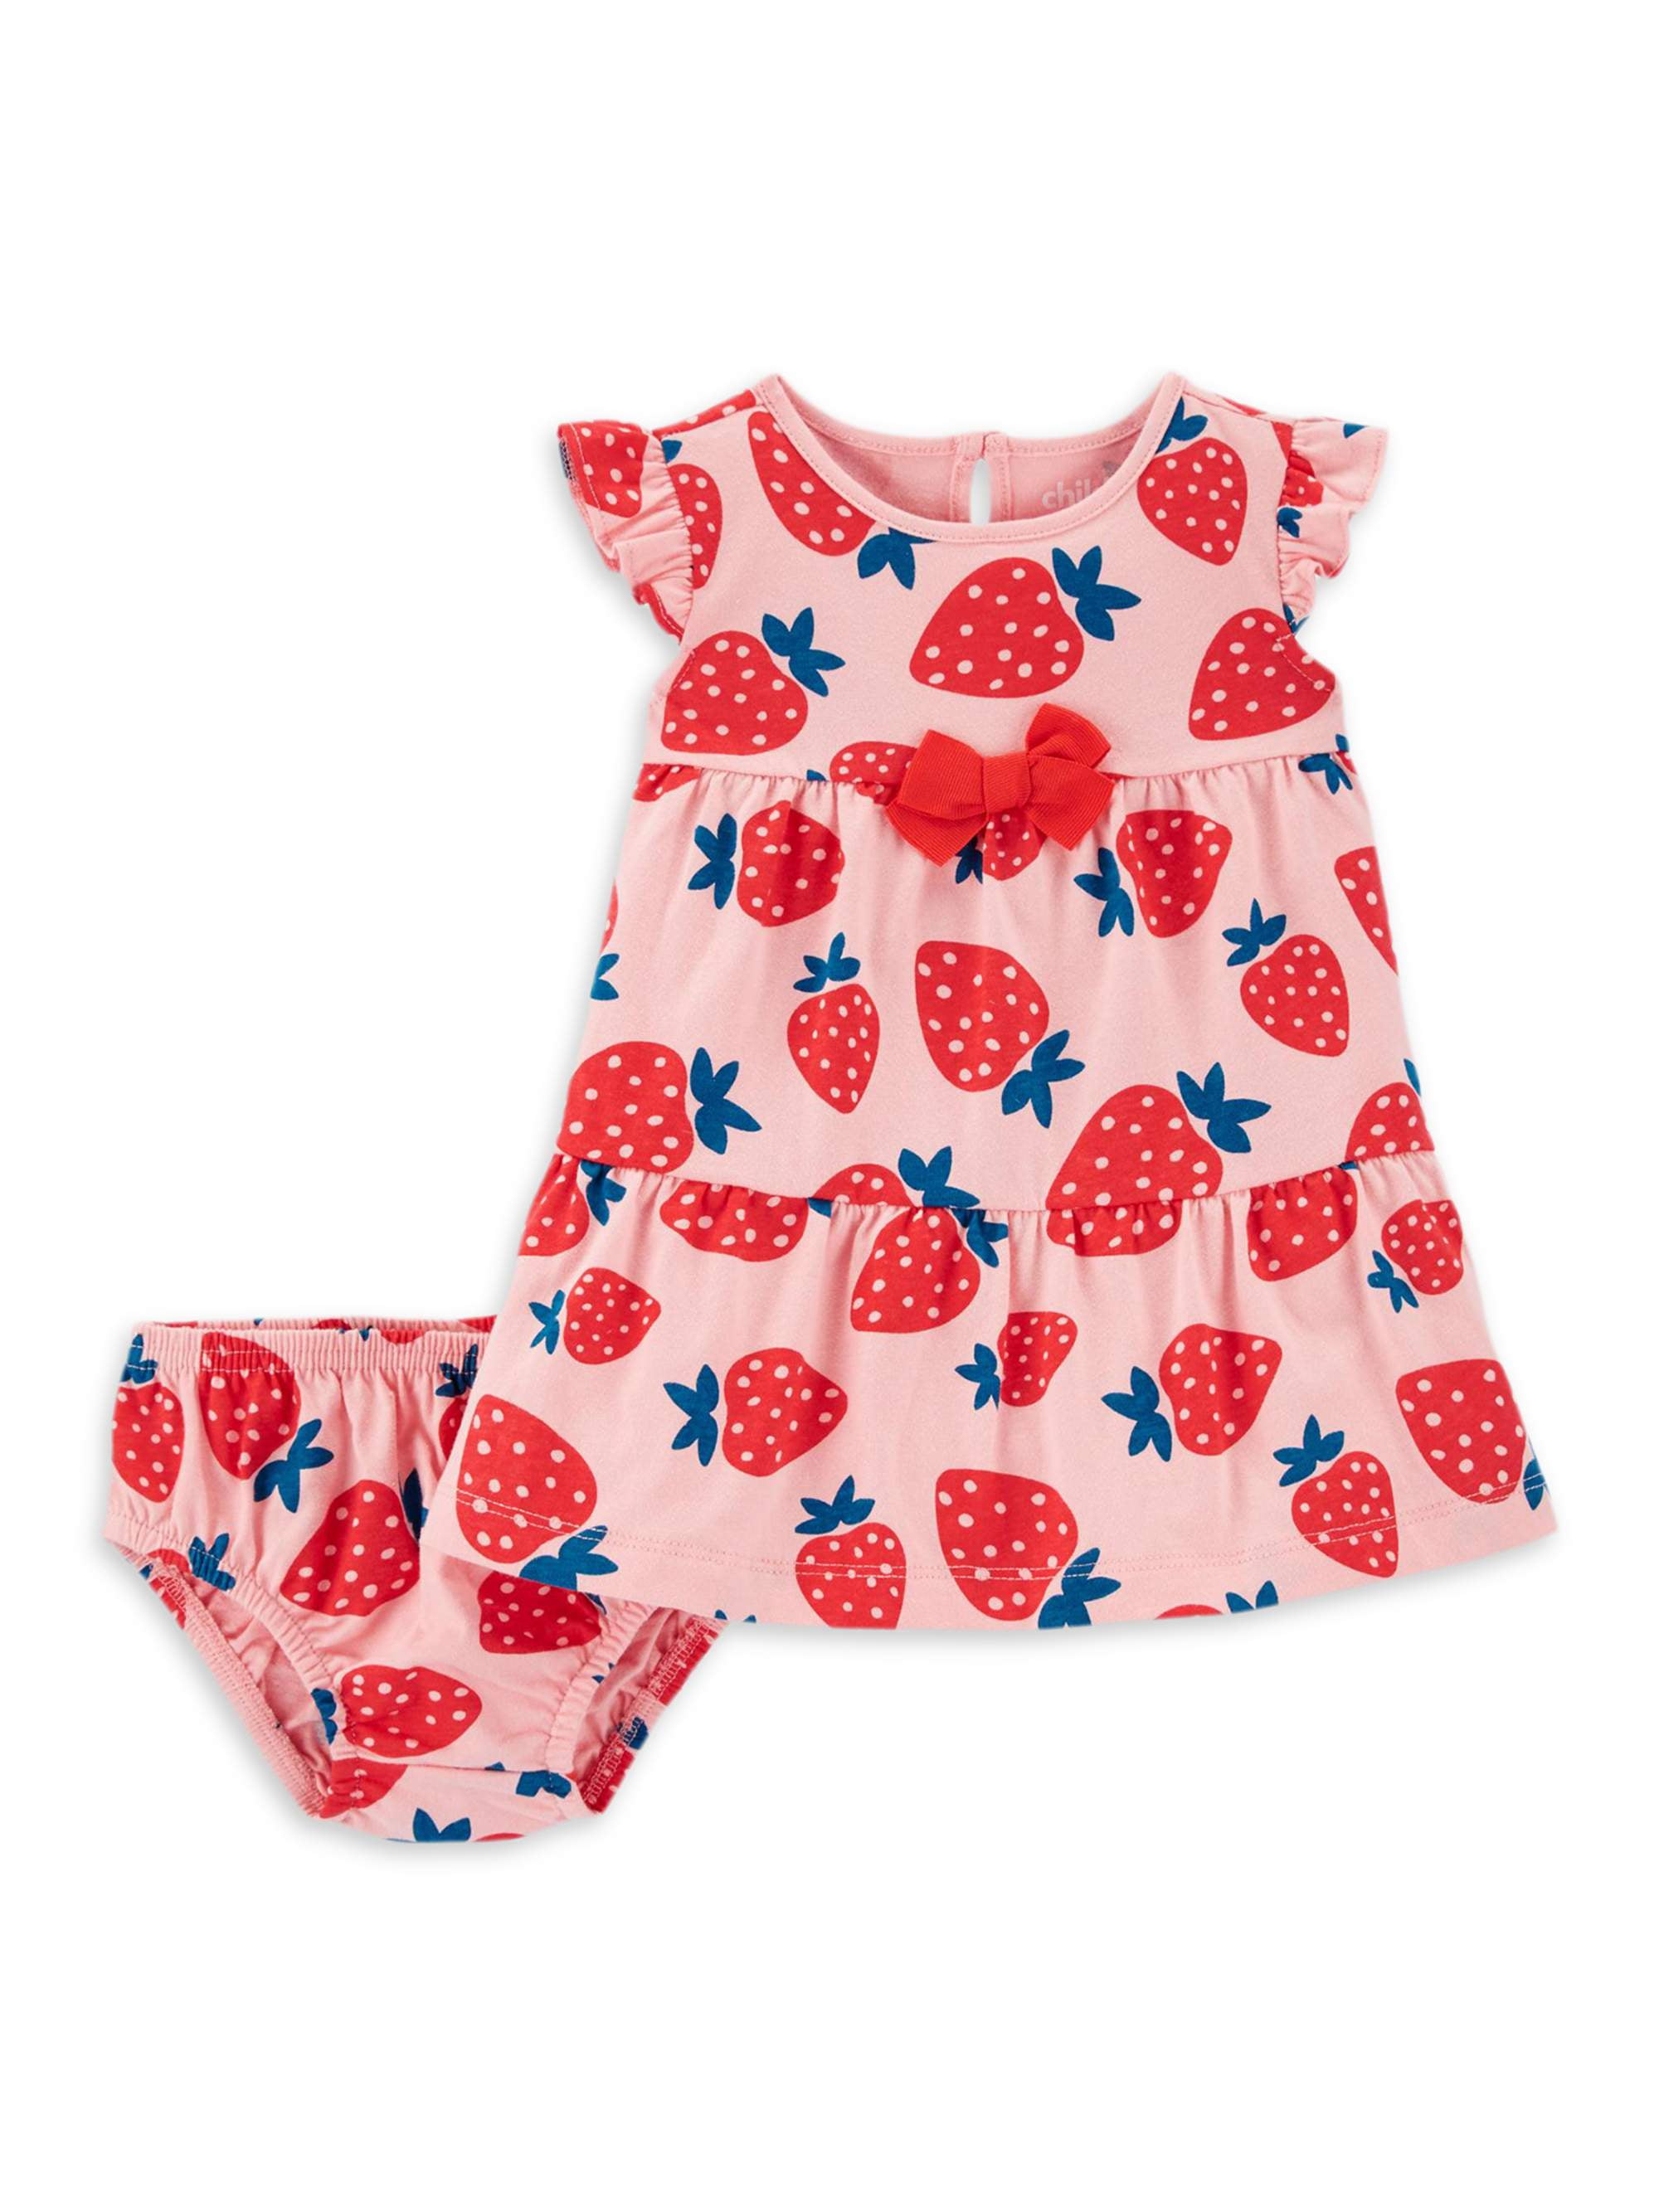 carter's strawberry outfit